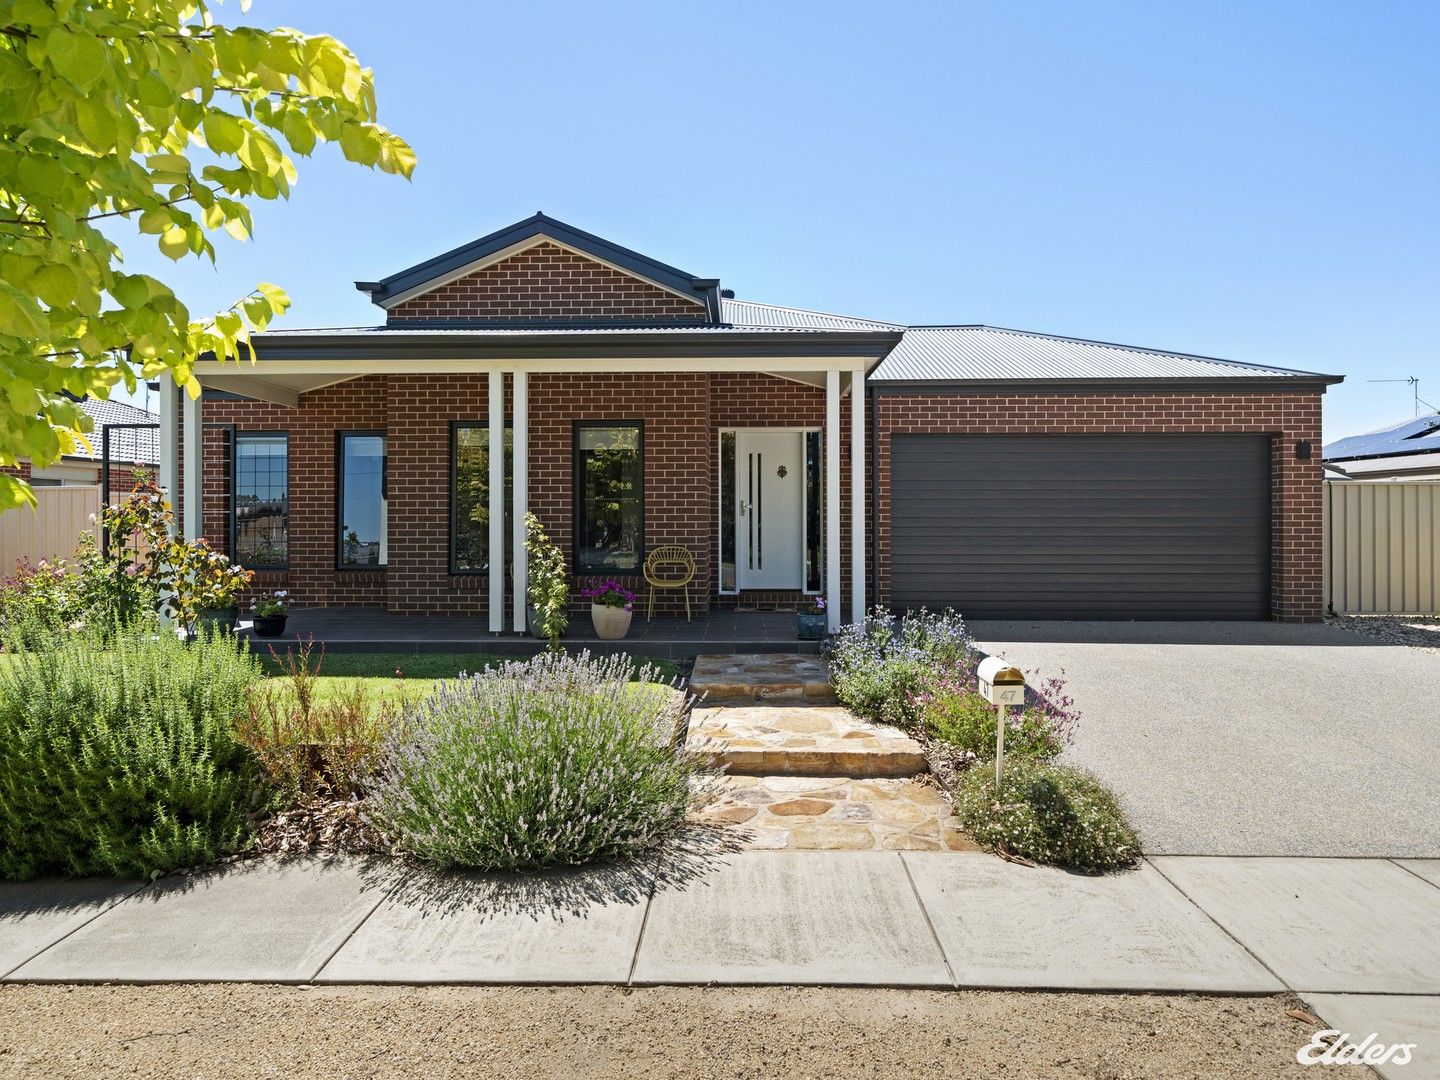 4 bedrooms House in 47 Weir Street EUROA VIC, 3666